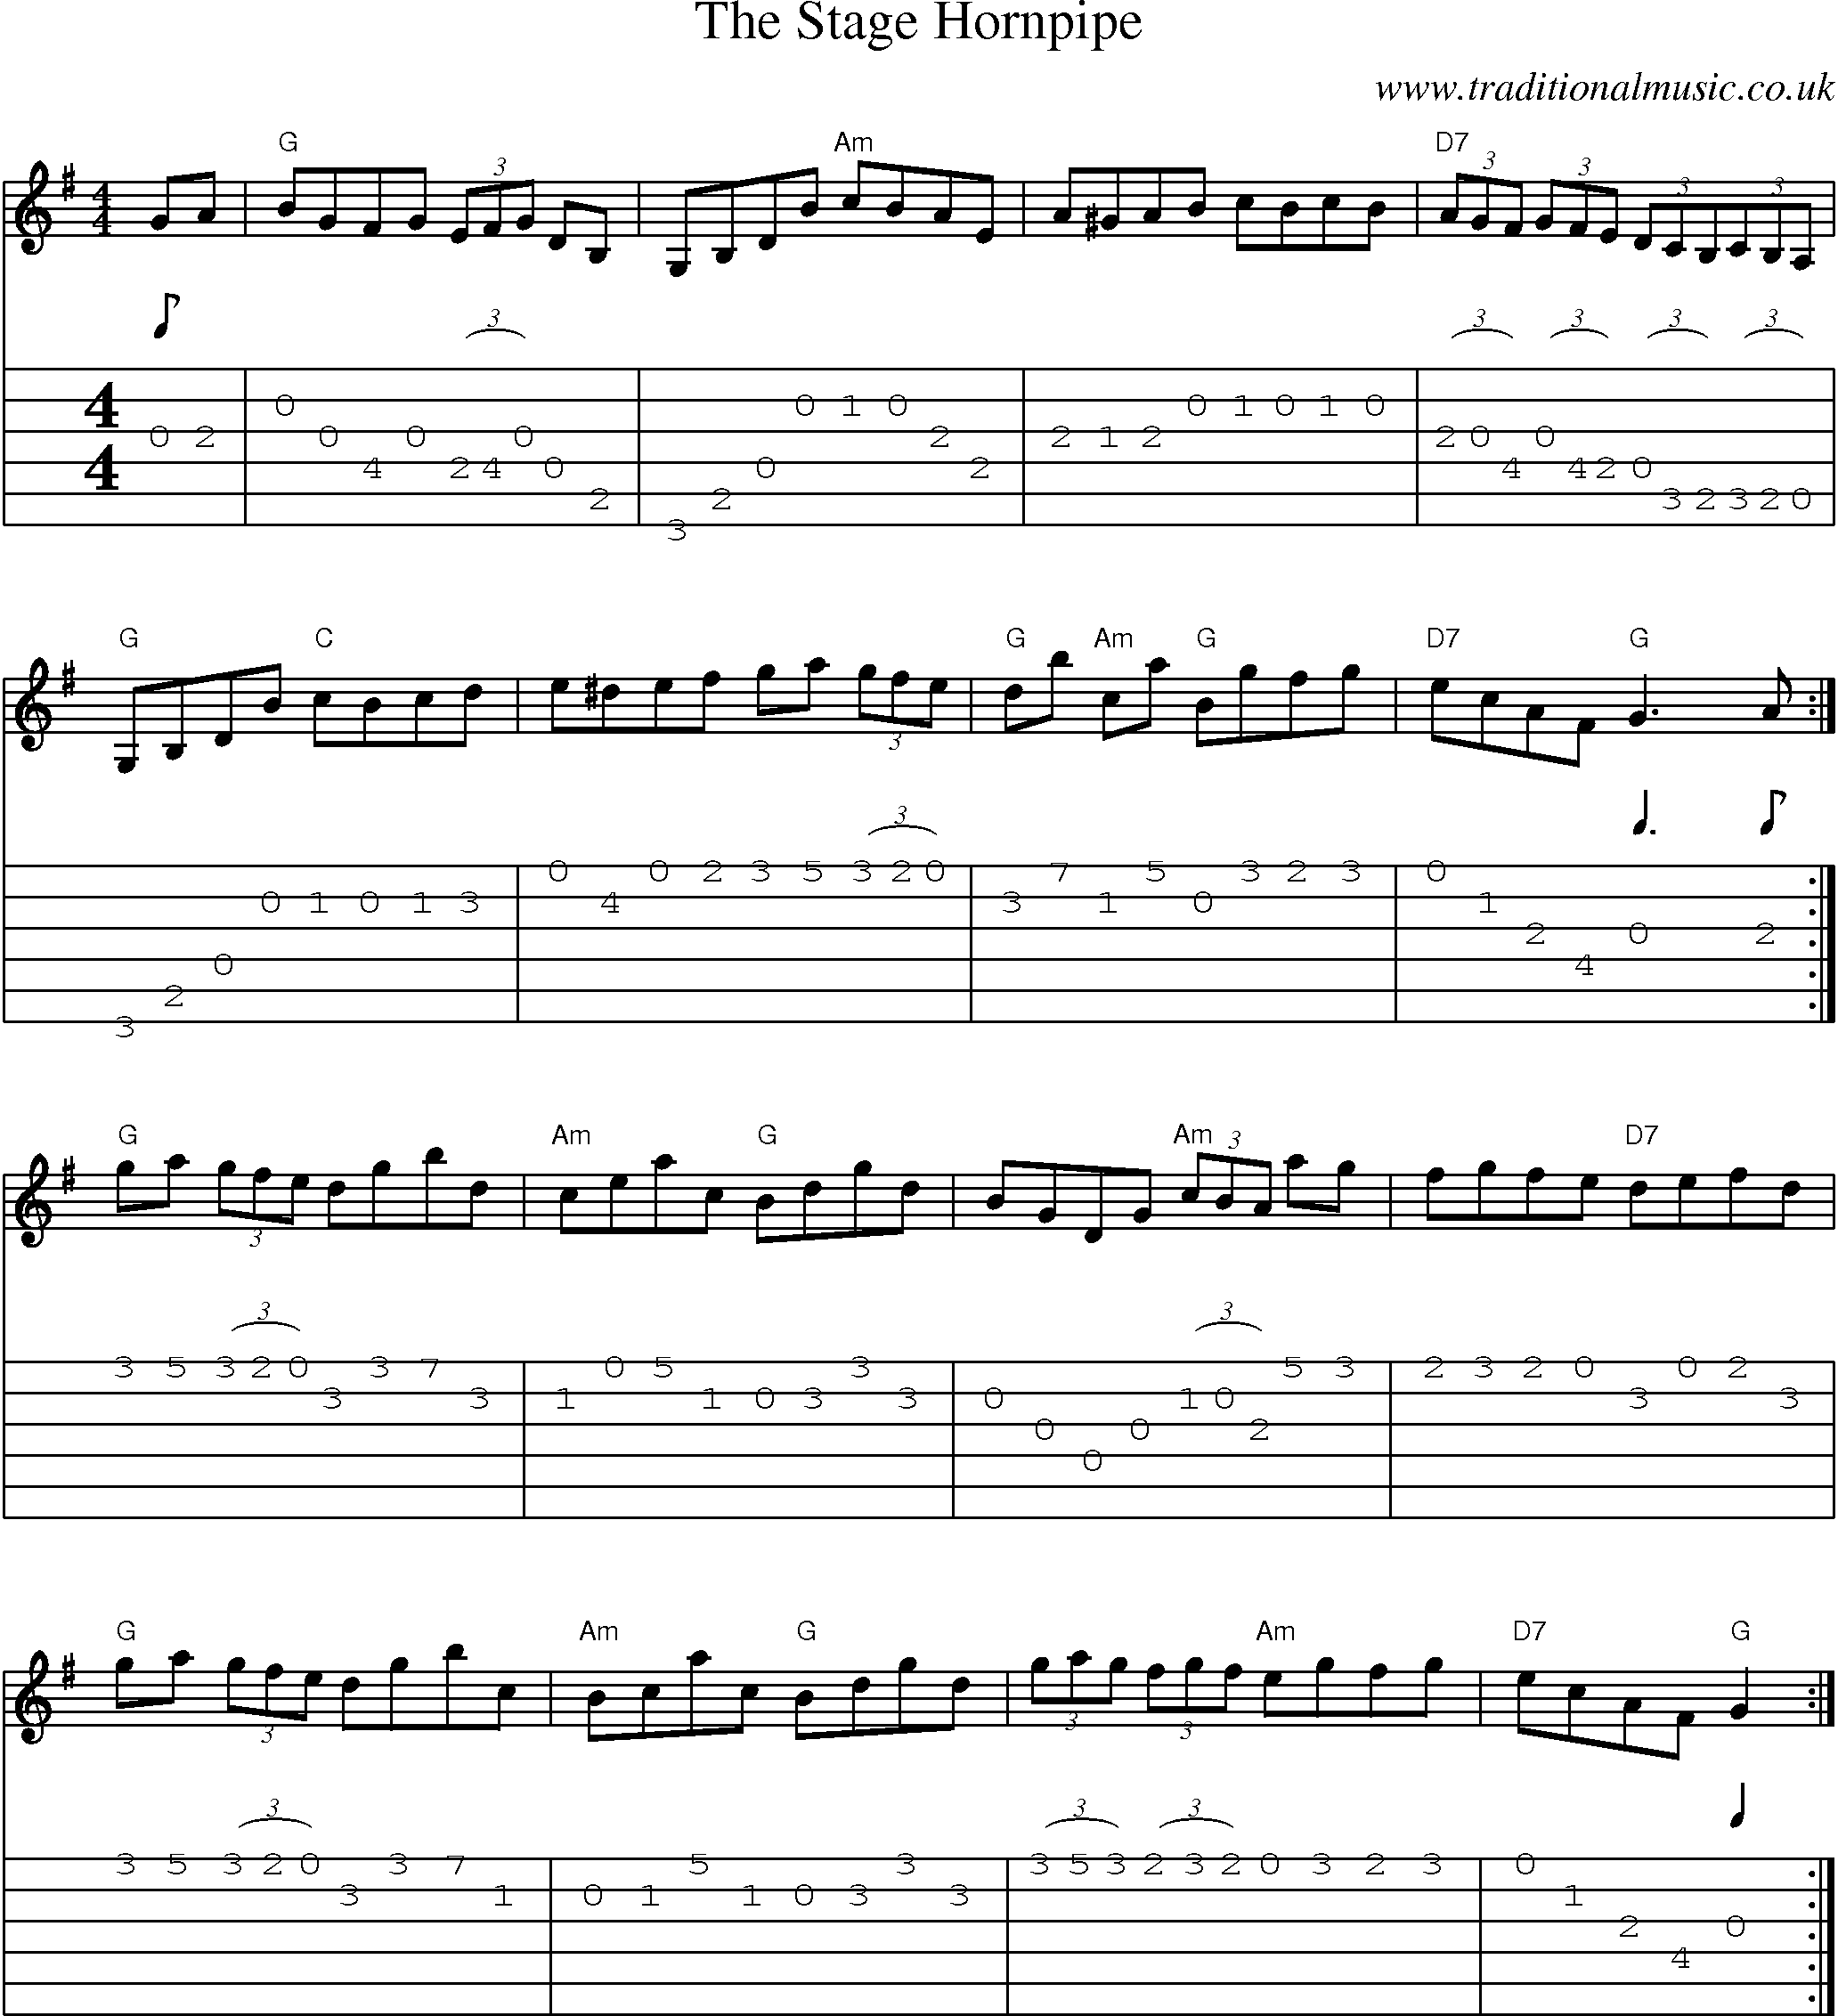 Music Score and Guitar Tabs for The Stage Hornpipe